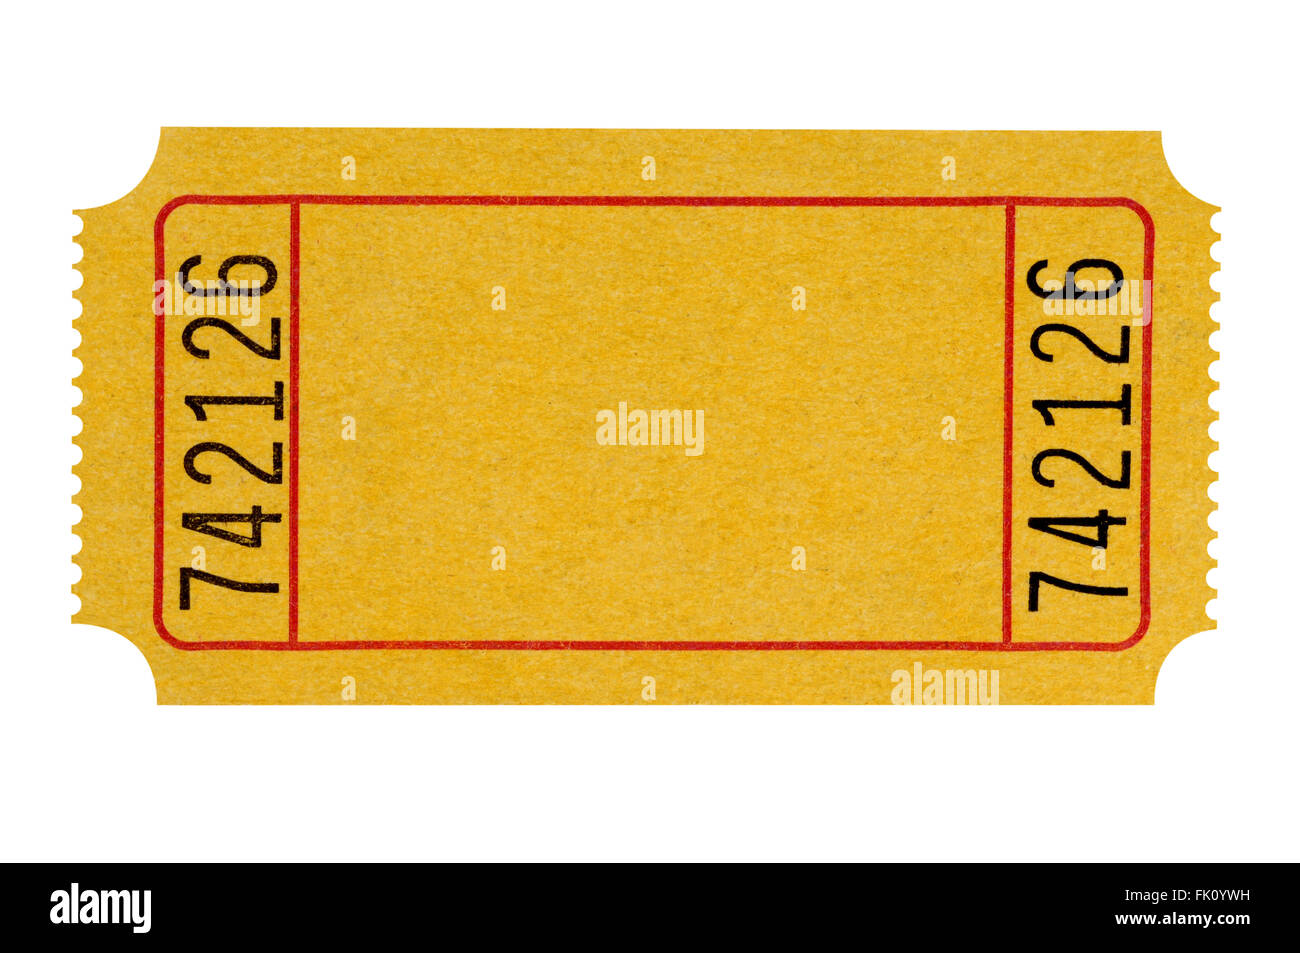 Blank yellow theater ticket isolated on a white background. Stock Photo